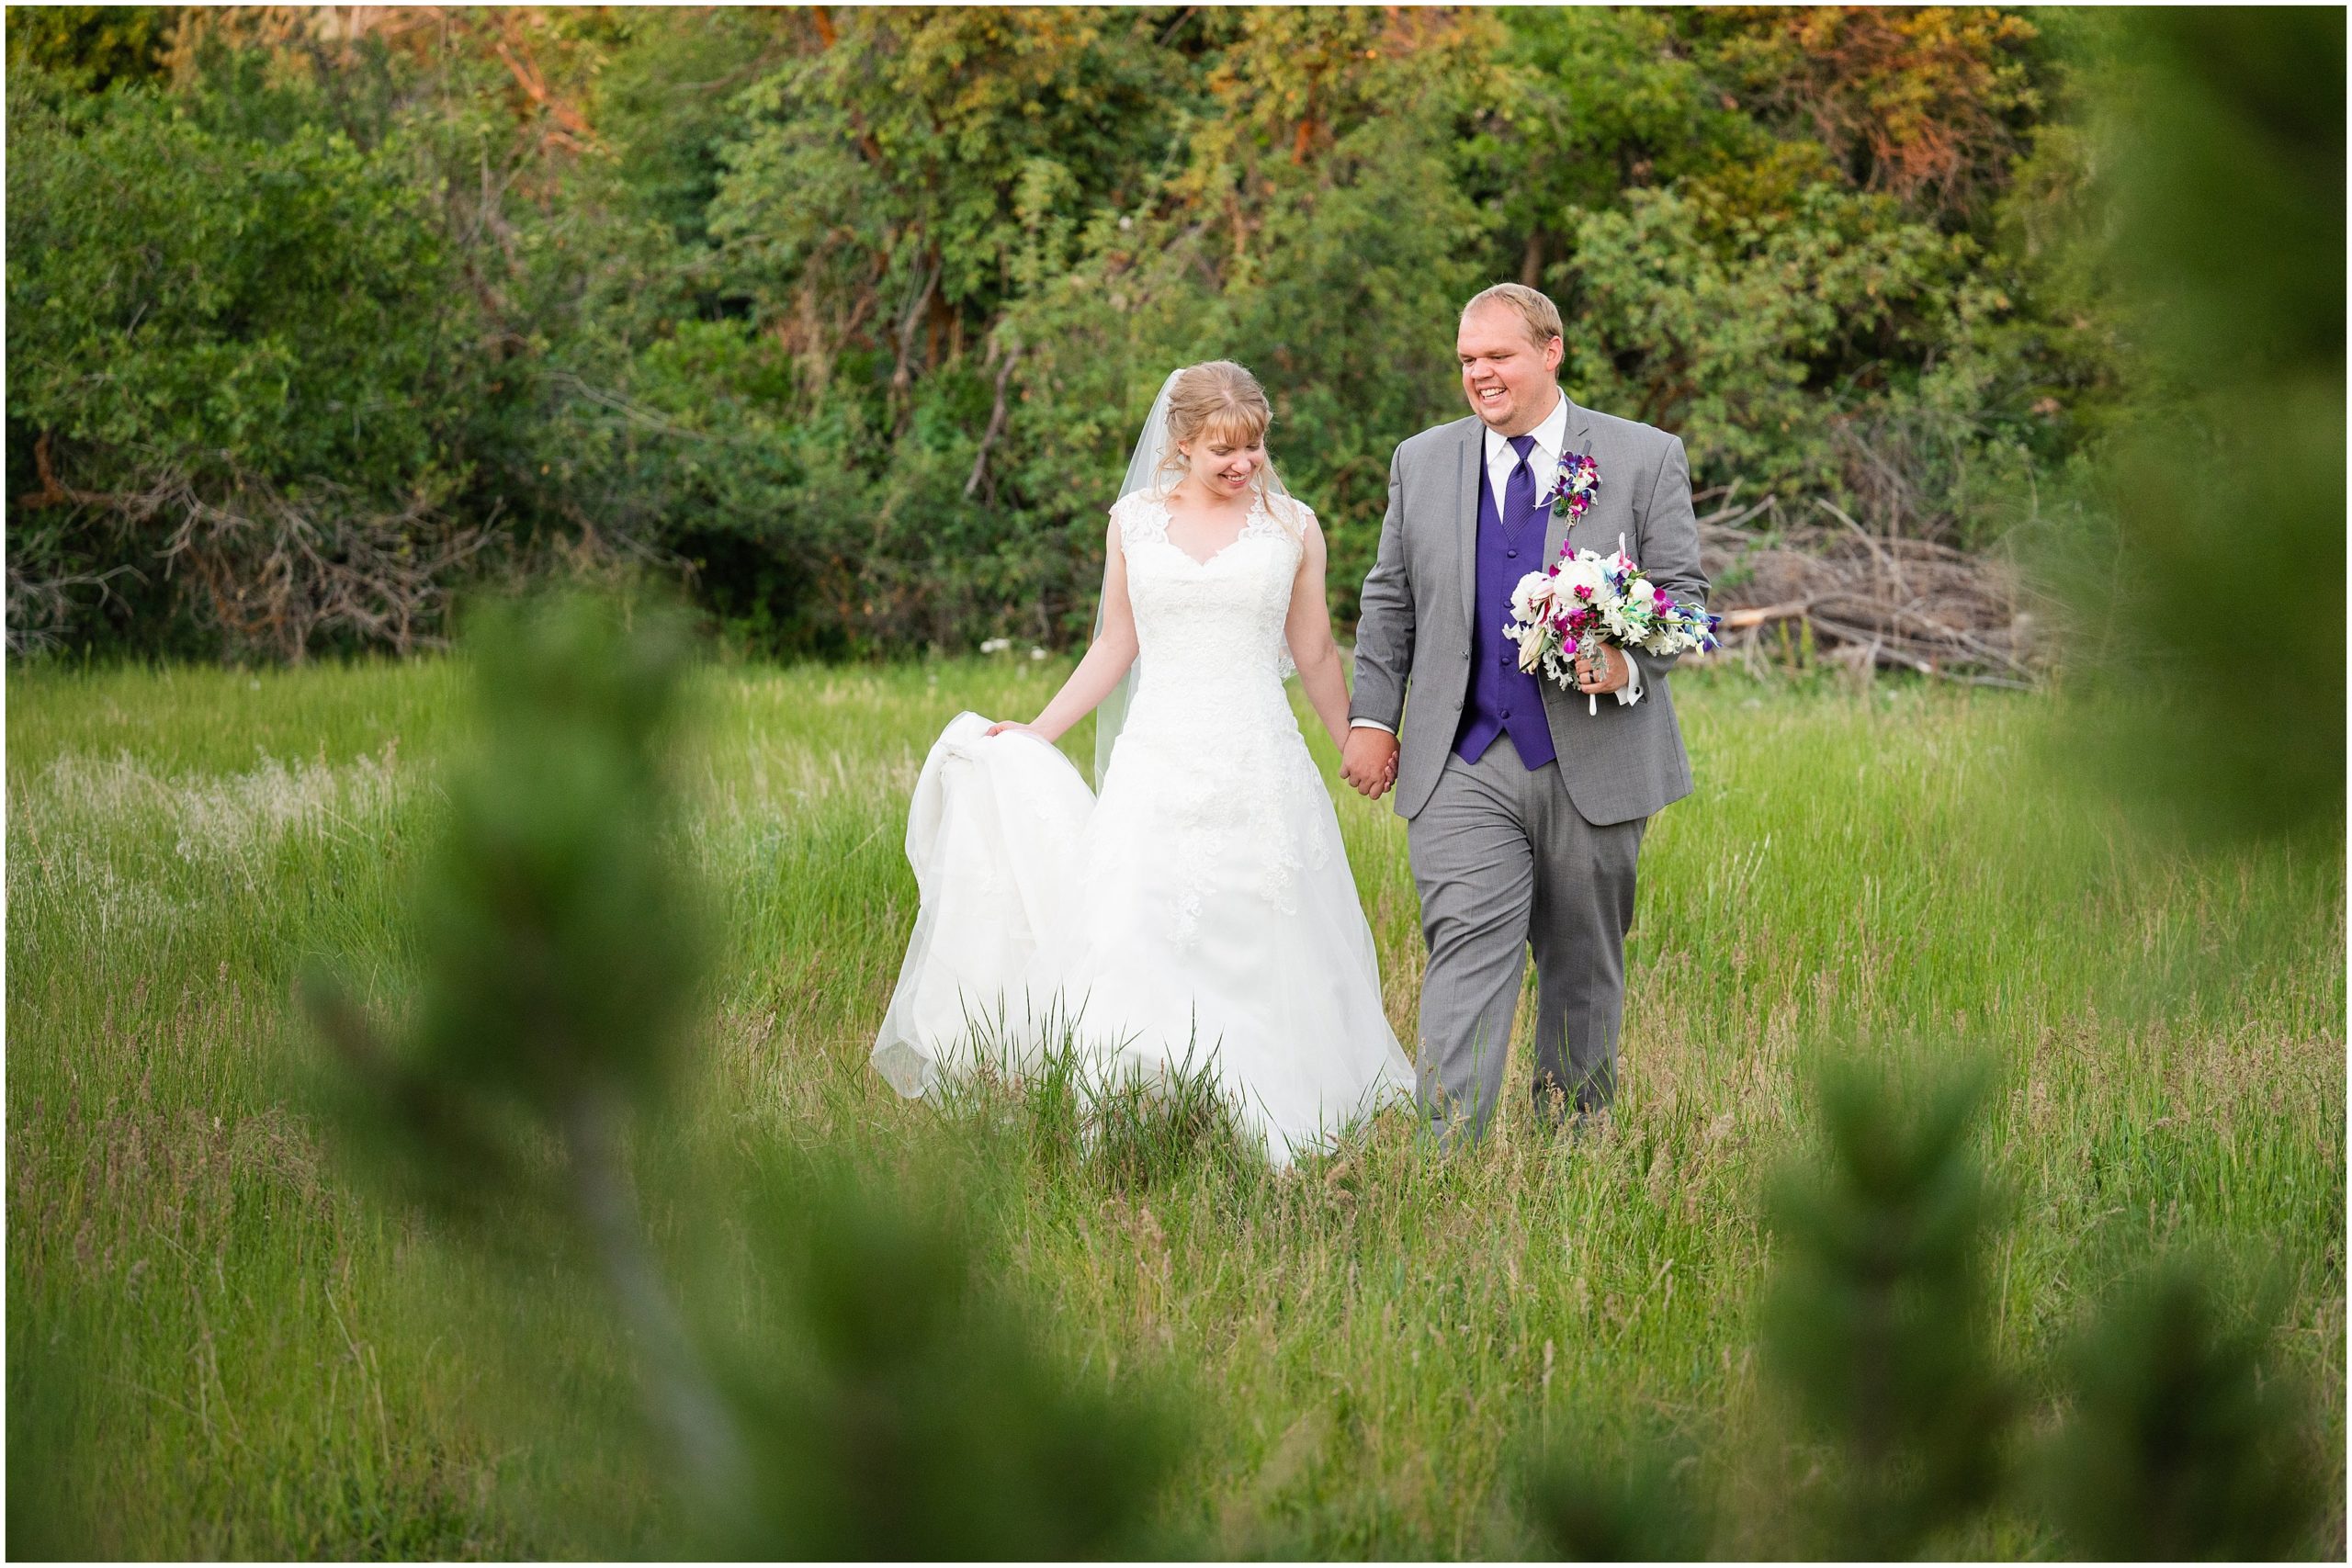 Bride and groom portraits in from of trees and mountains | Orchid Inspired Summer Wedding at Oak Hills Utah | Jessie and Dallin Photography